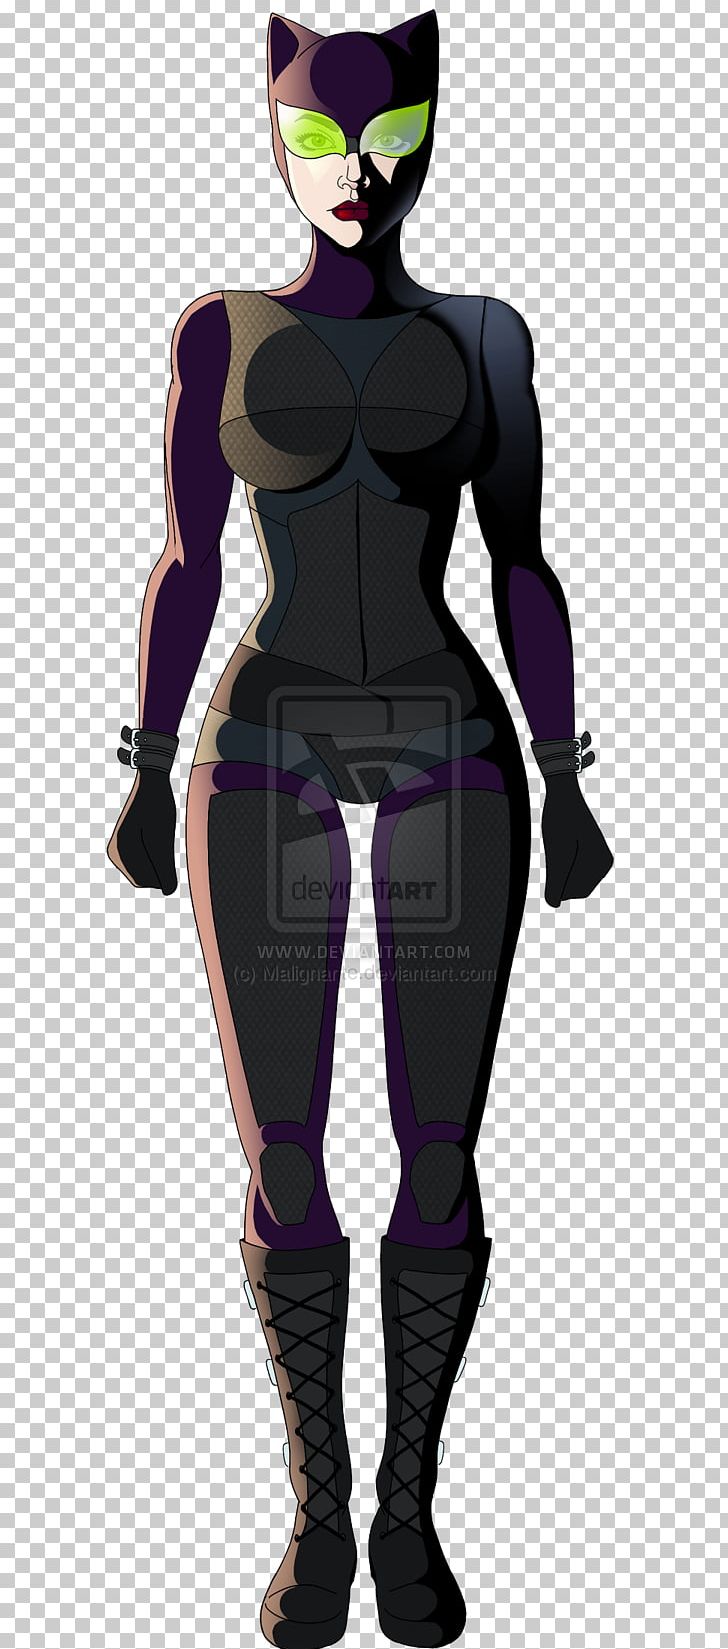 Catwoman Concept Art PNG, Clipart, Art, Artist, Black Hair, Catwoman, Concept Free PNG Download